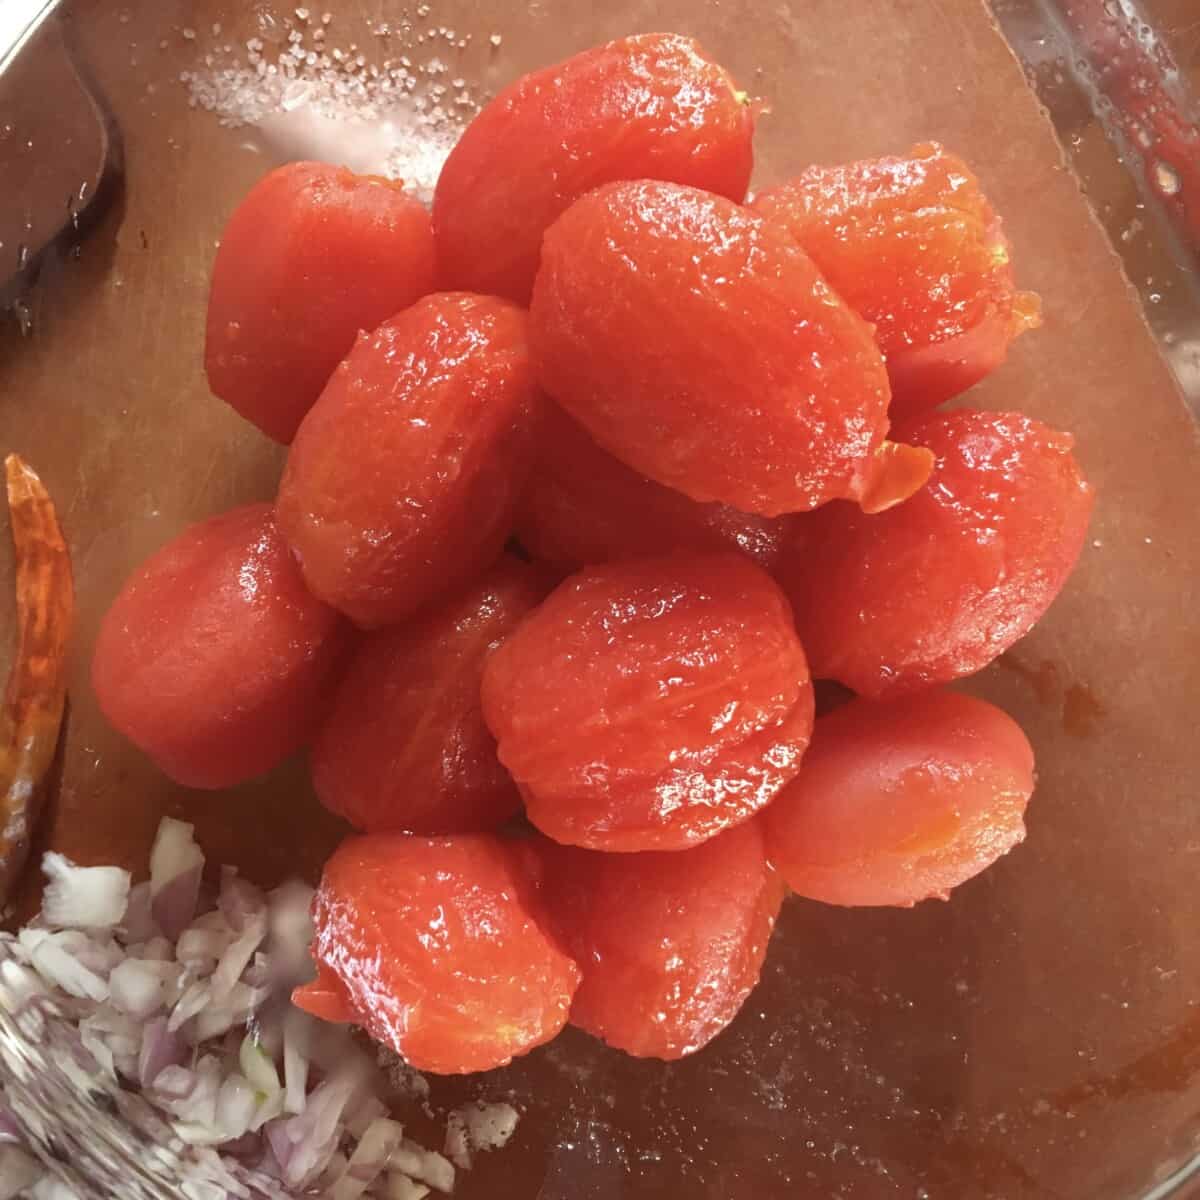 blanched and peeled grape Datterino tomatoes in a bowl